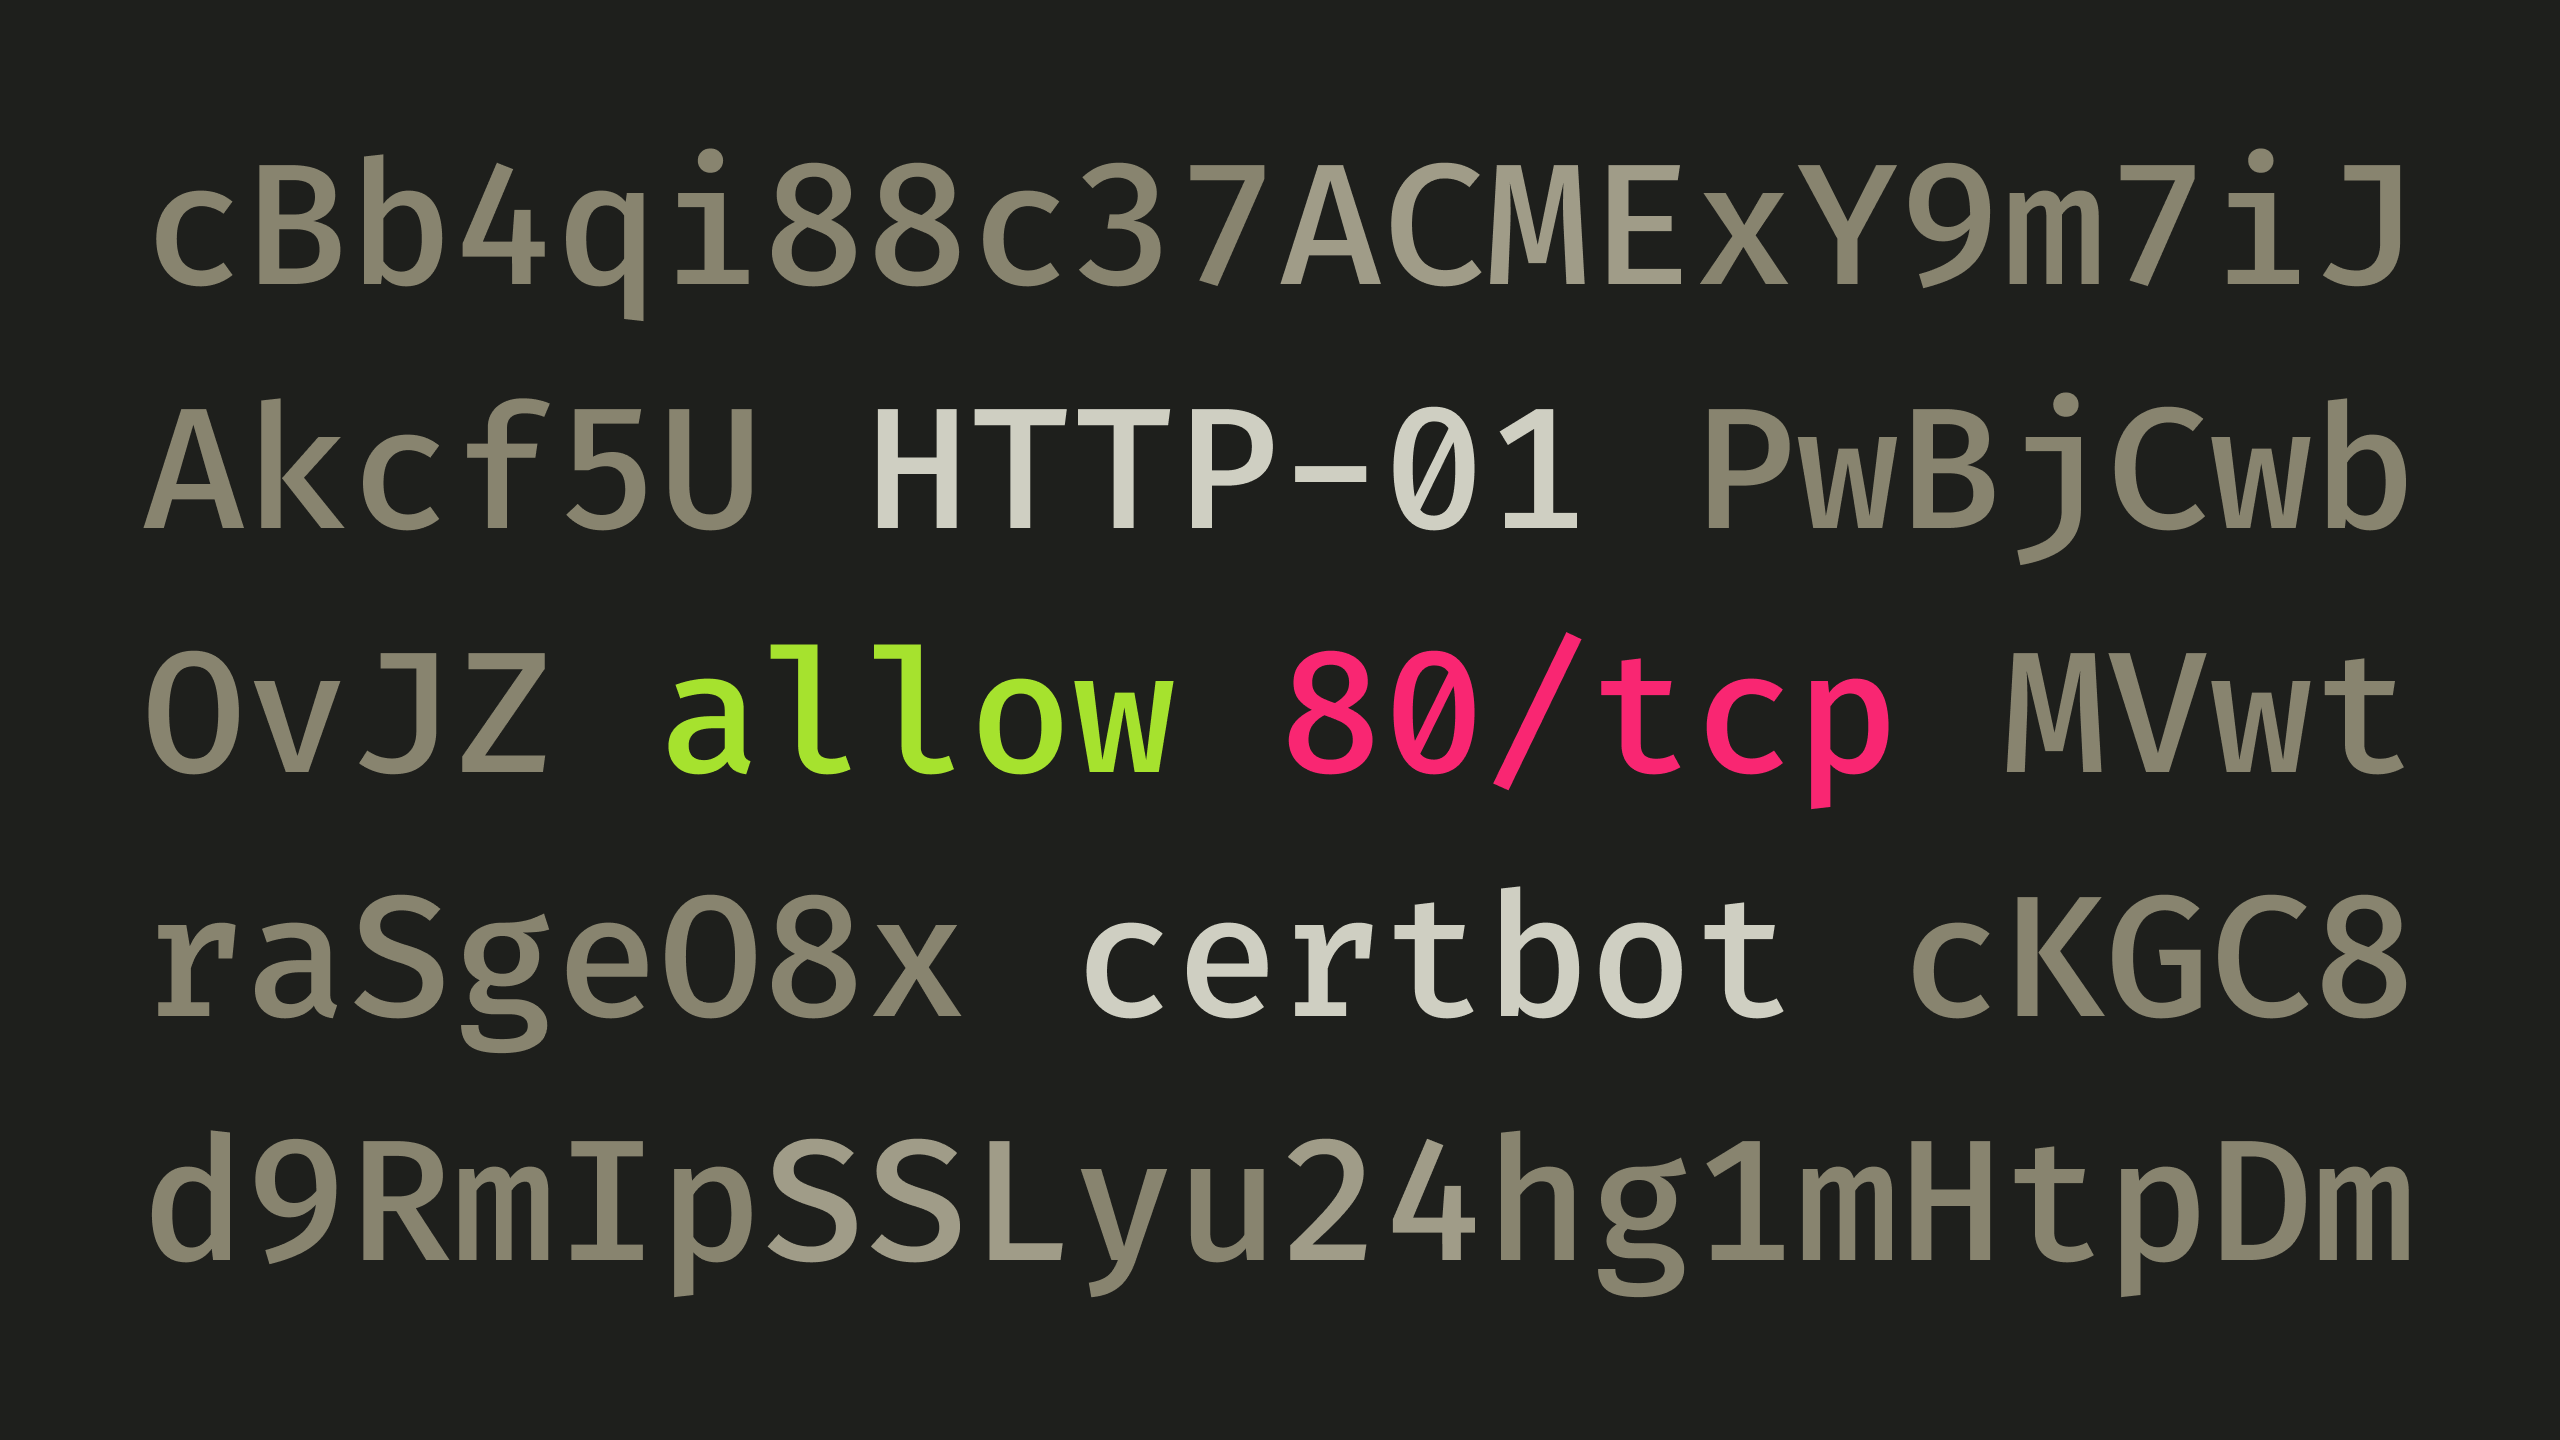 Random characters surrounding "allow 80/tcp", "HTTP-01", and "certbot".